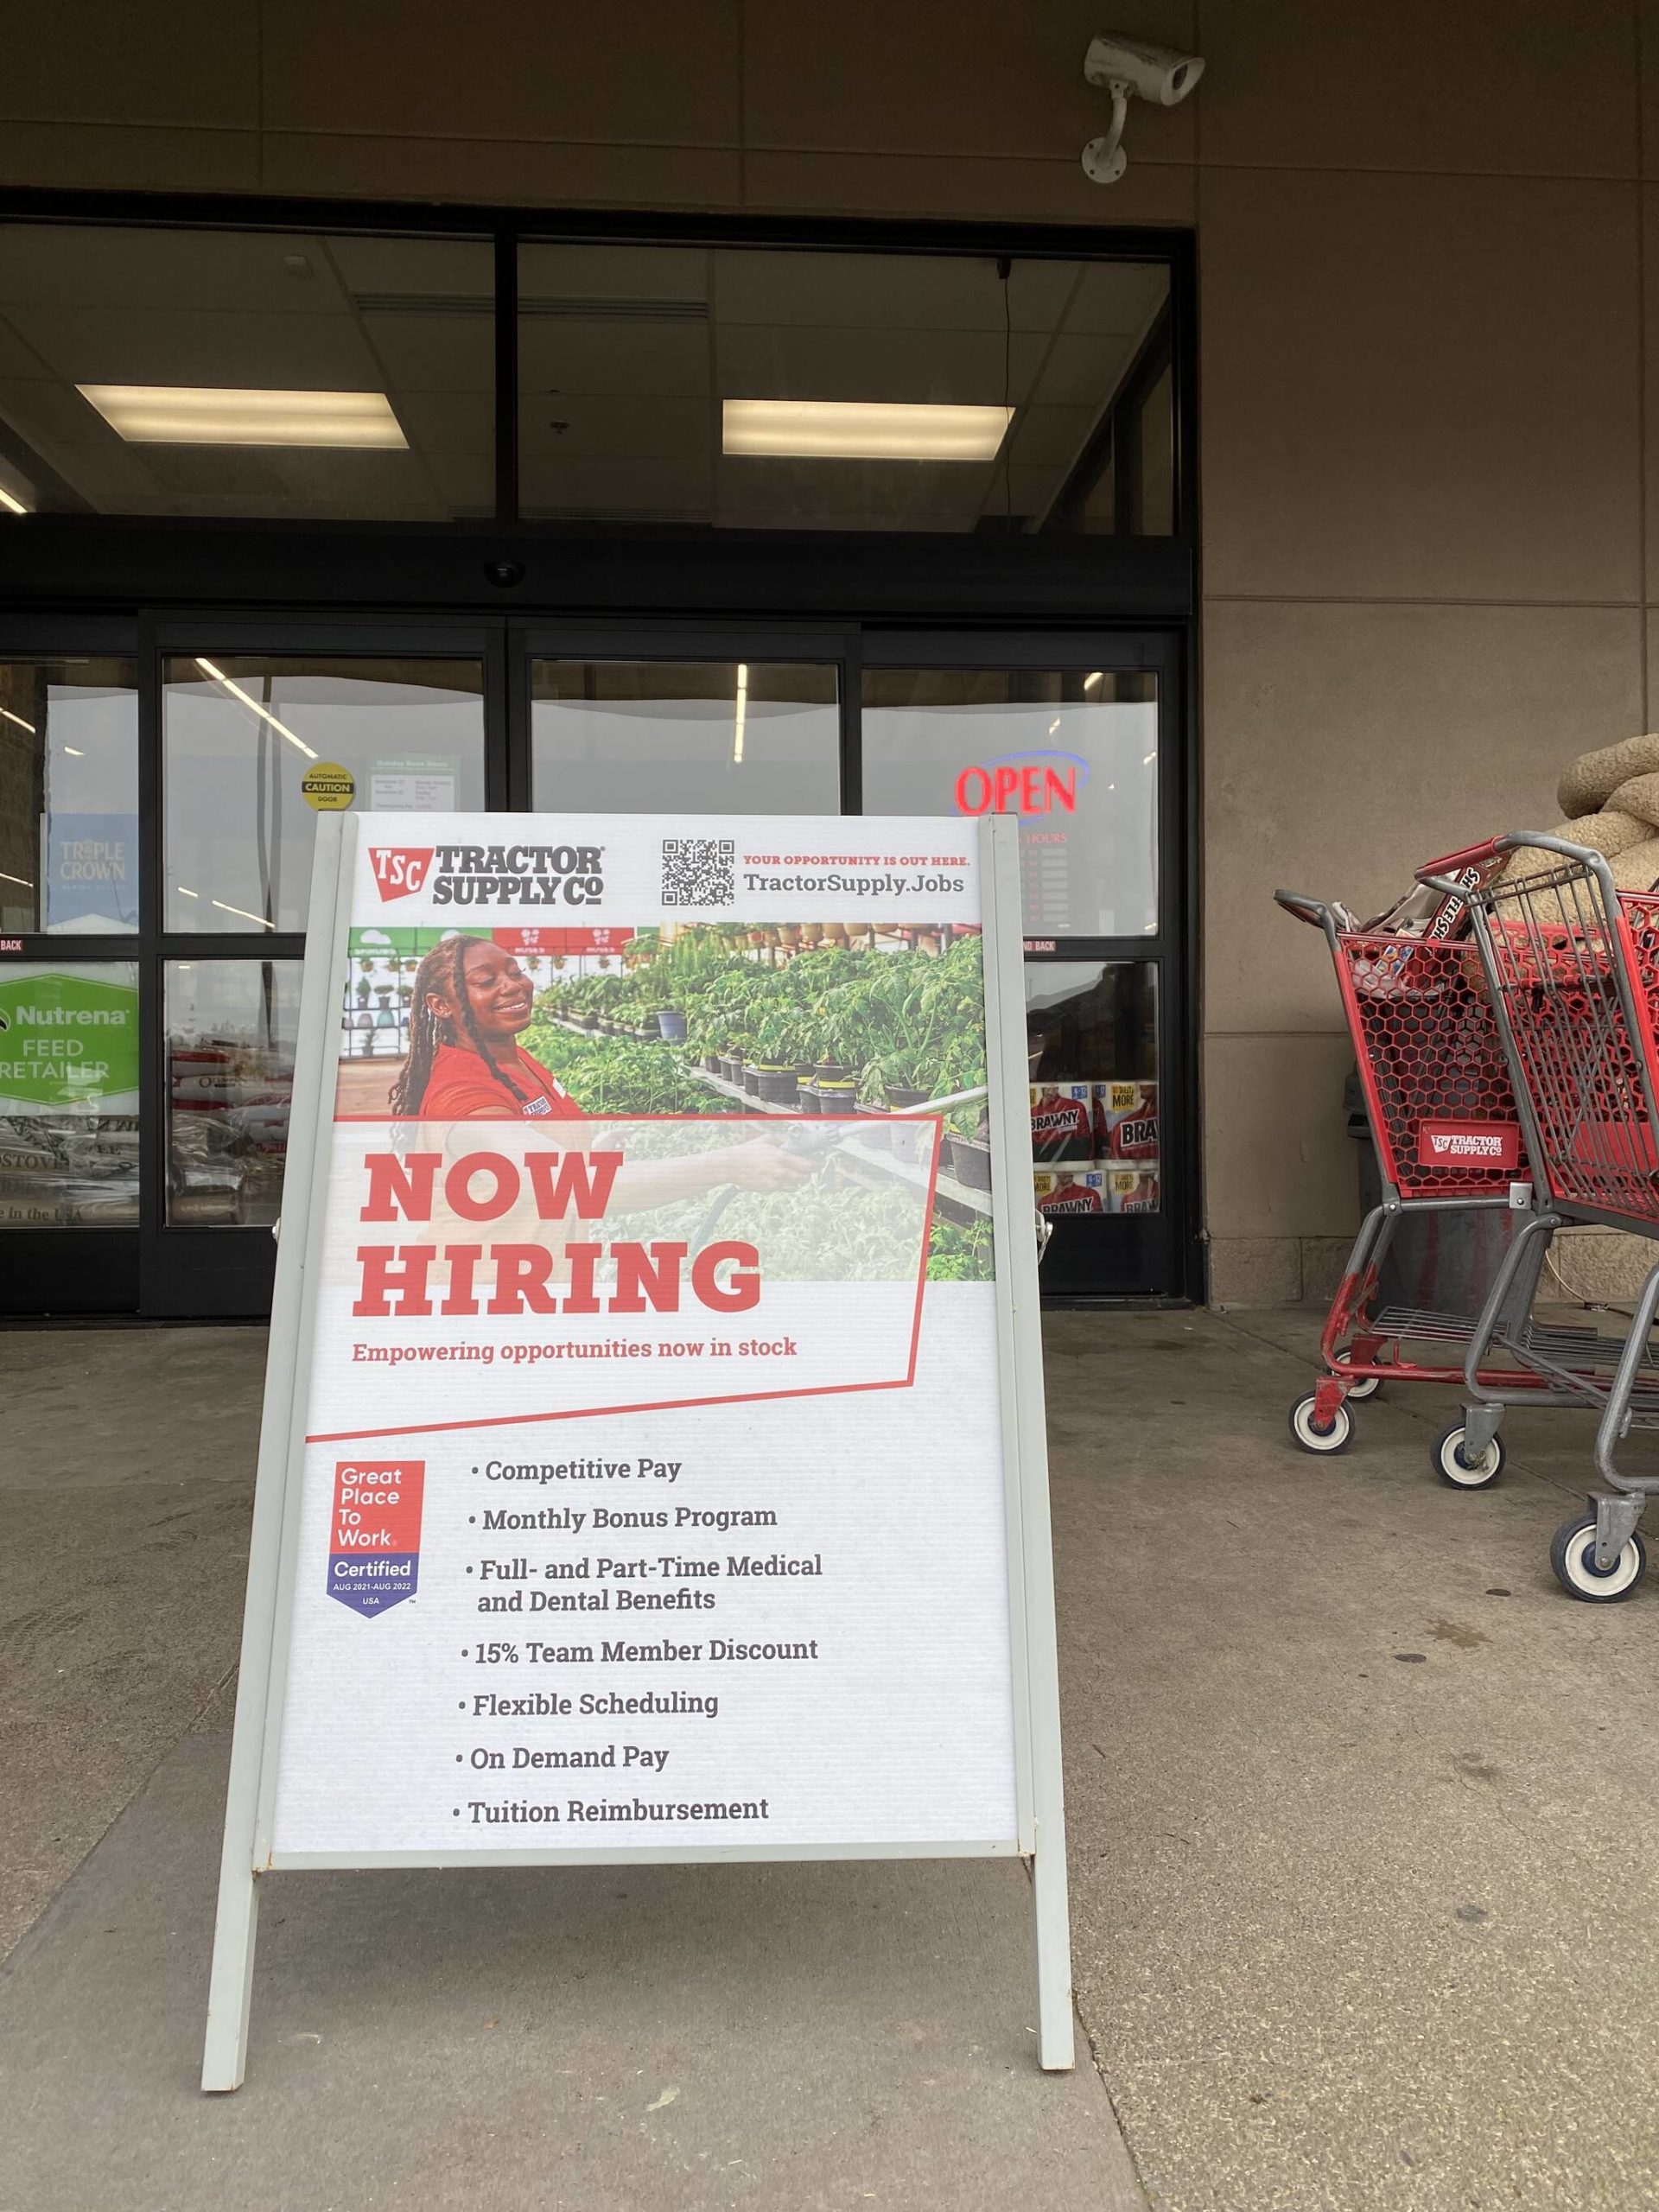 Over 1,600 residents of Grays Harbor County indicated they were looking for work in October, despite ongoing labor shortages.